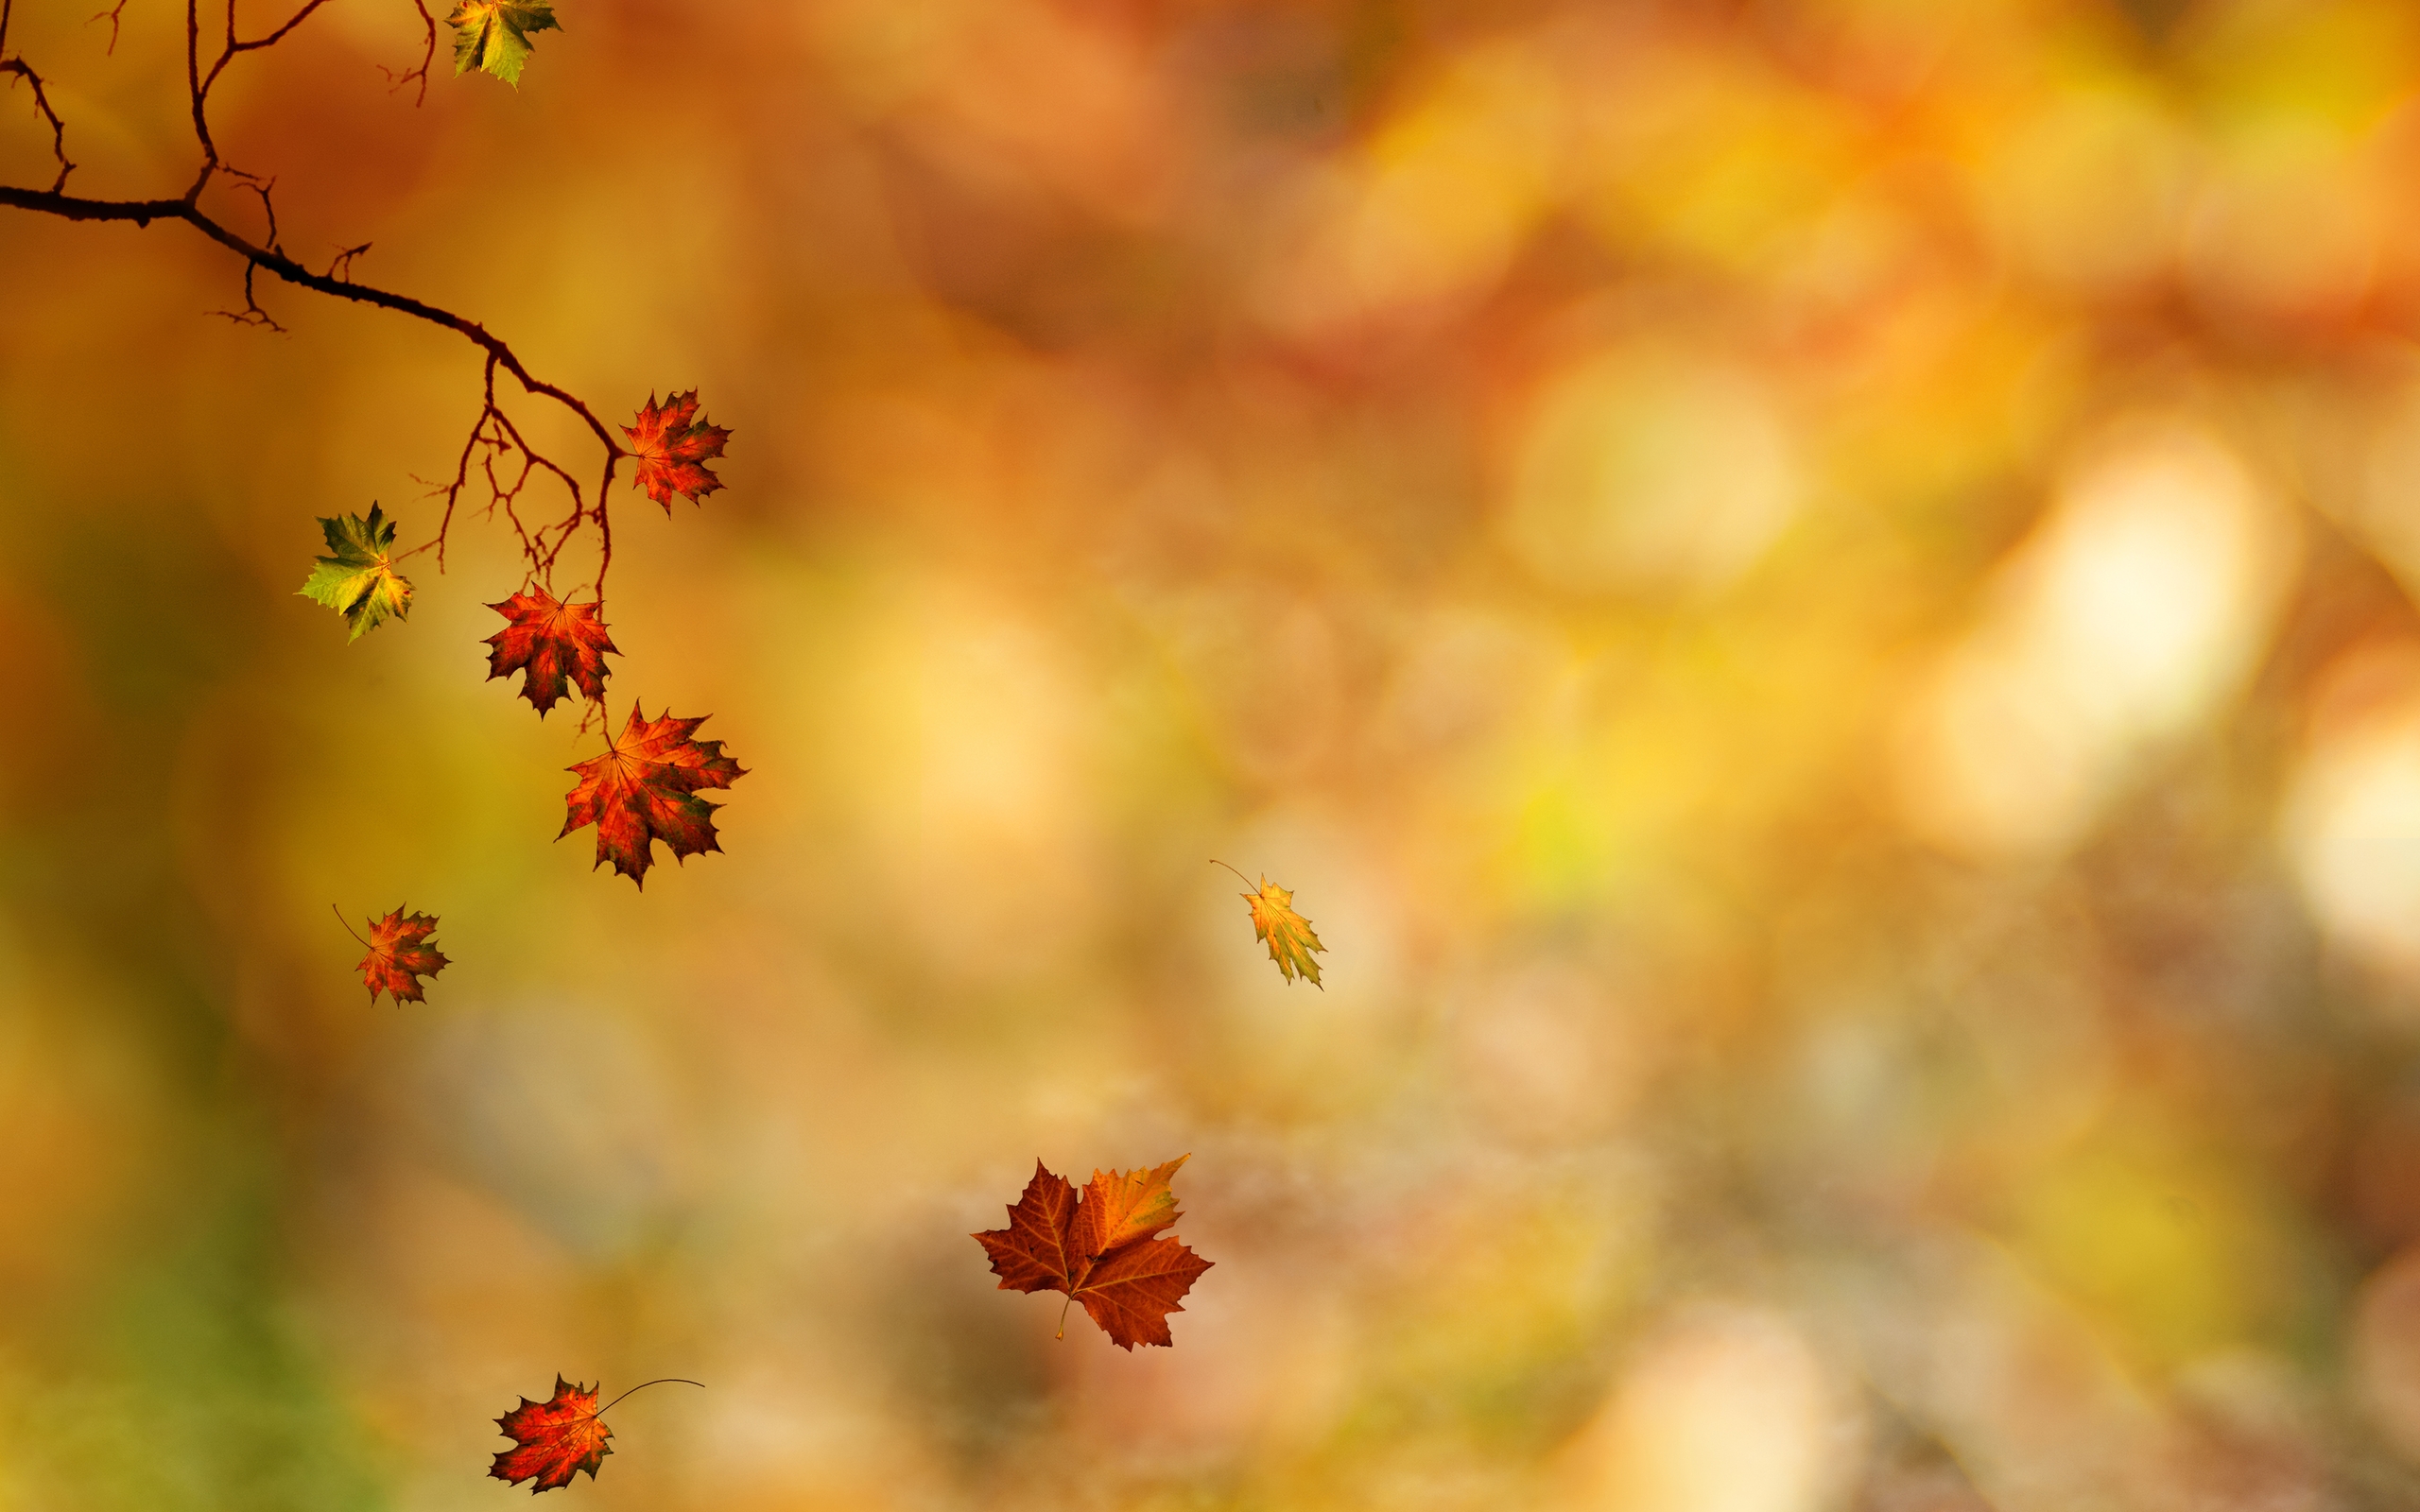 Fall Leaves Background 6016 6285 Hd Wallpaper 1